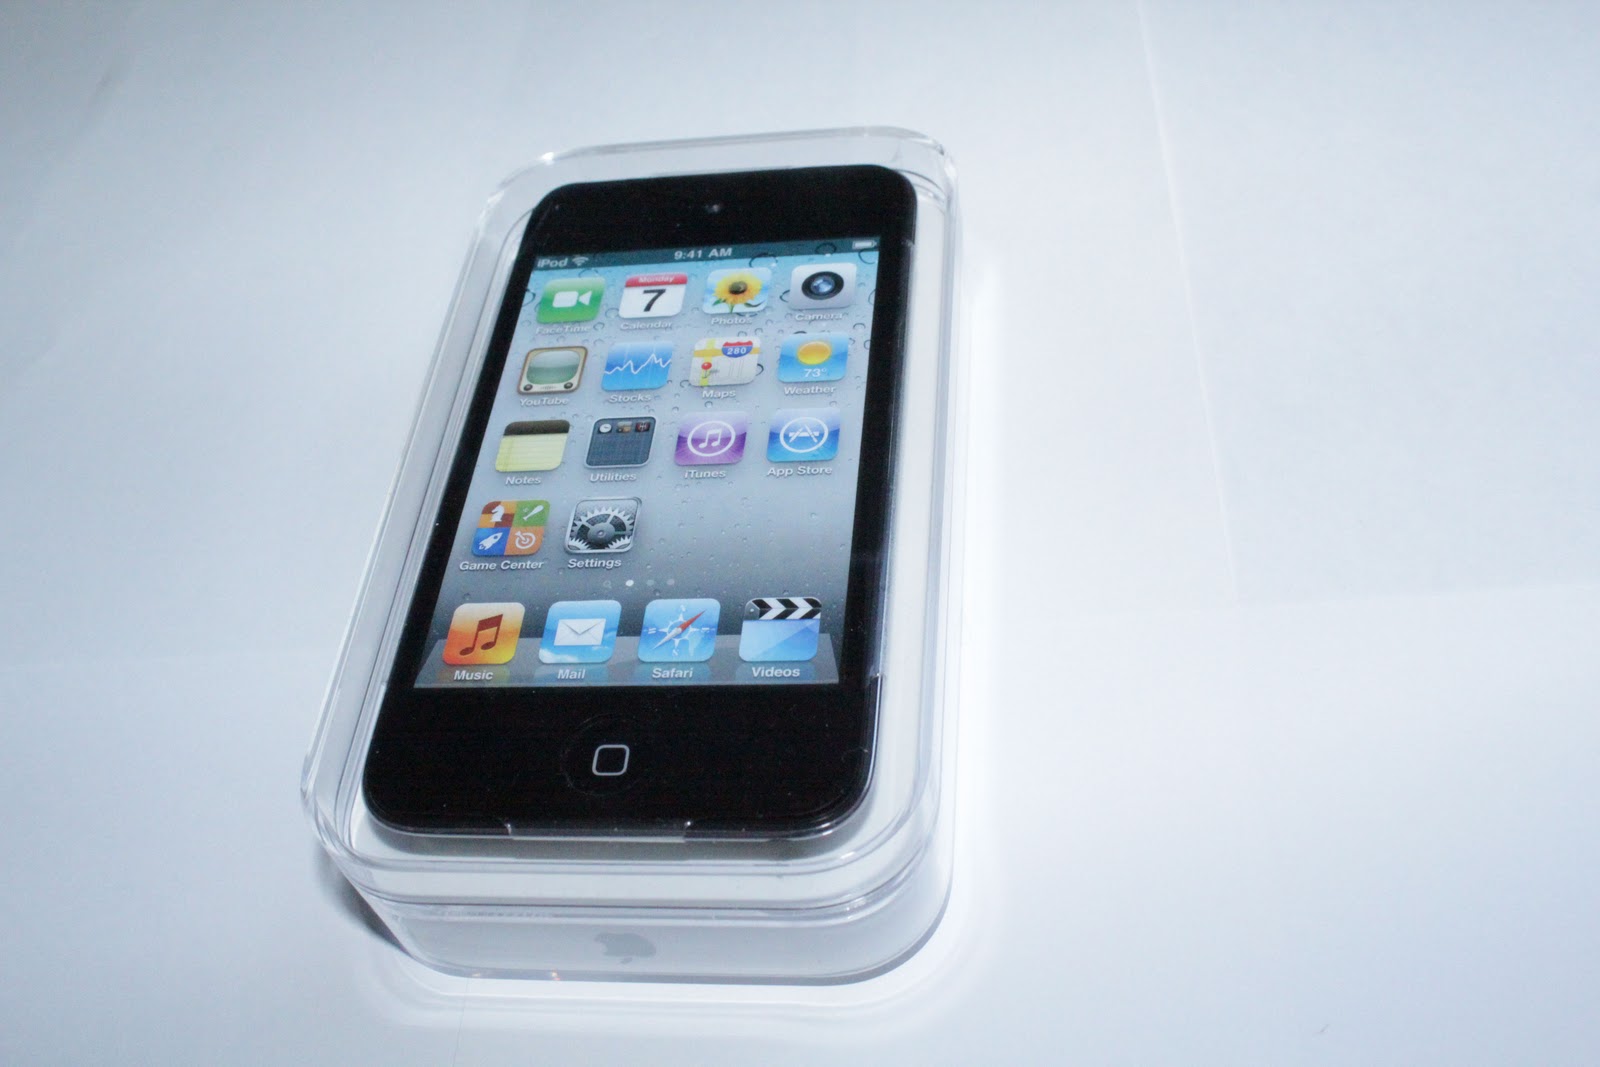 ipod nano touch, ipod touch 4g with camera, iphone touch 4g